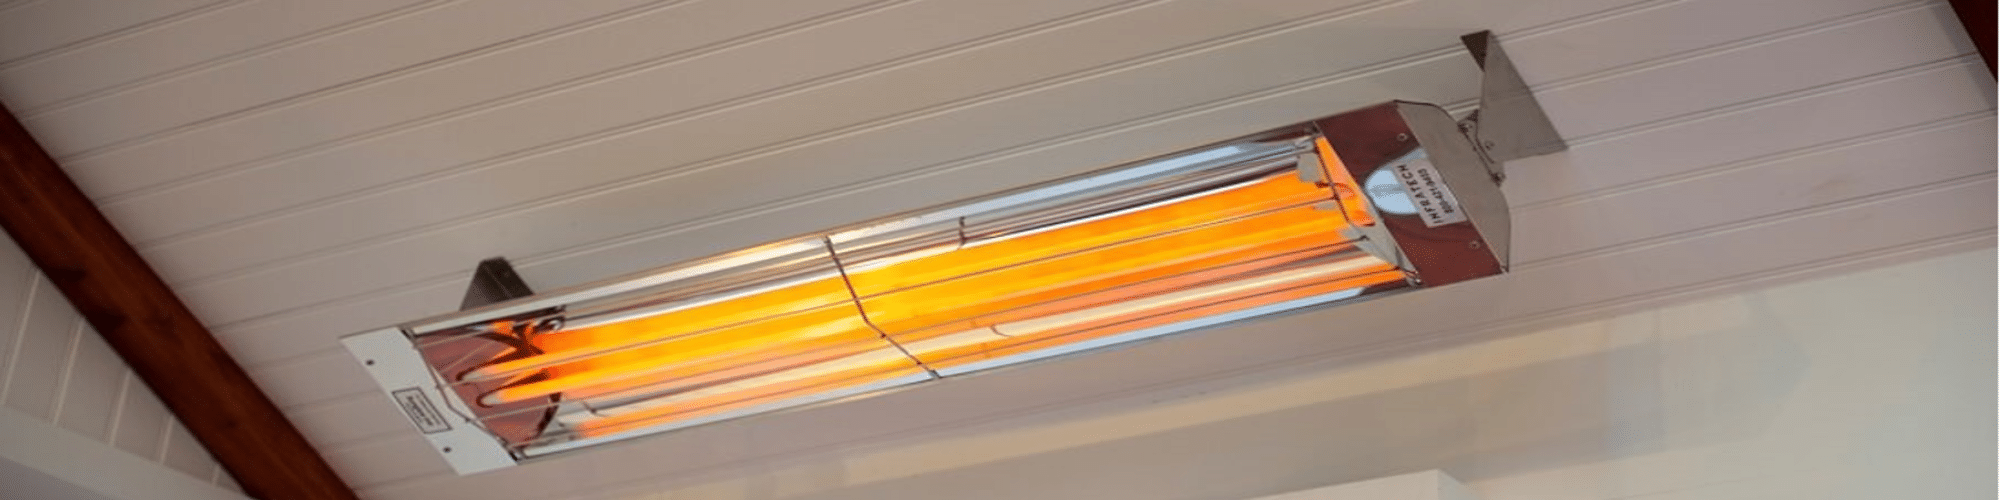 Are Infrared Heaters Safe? & How Do They Work?